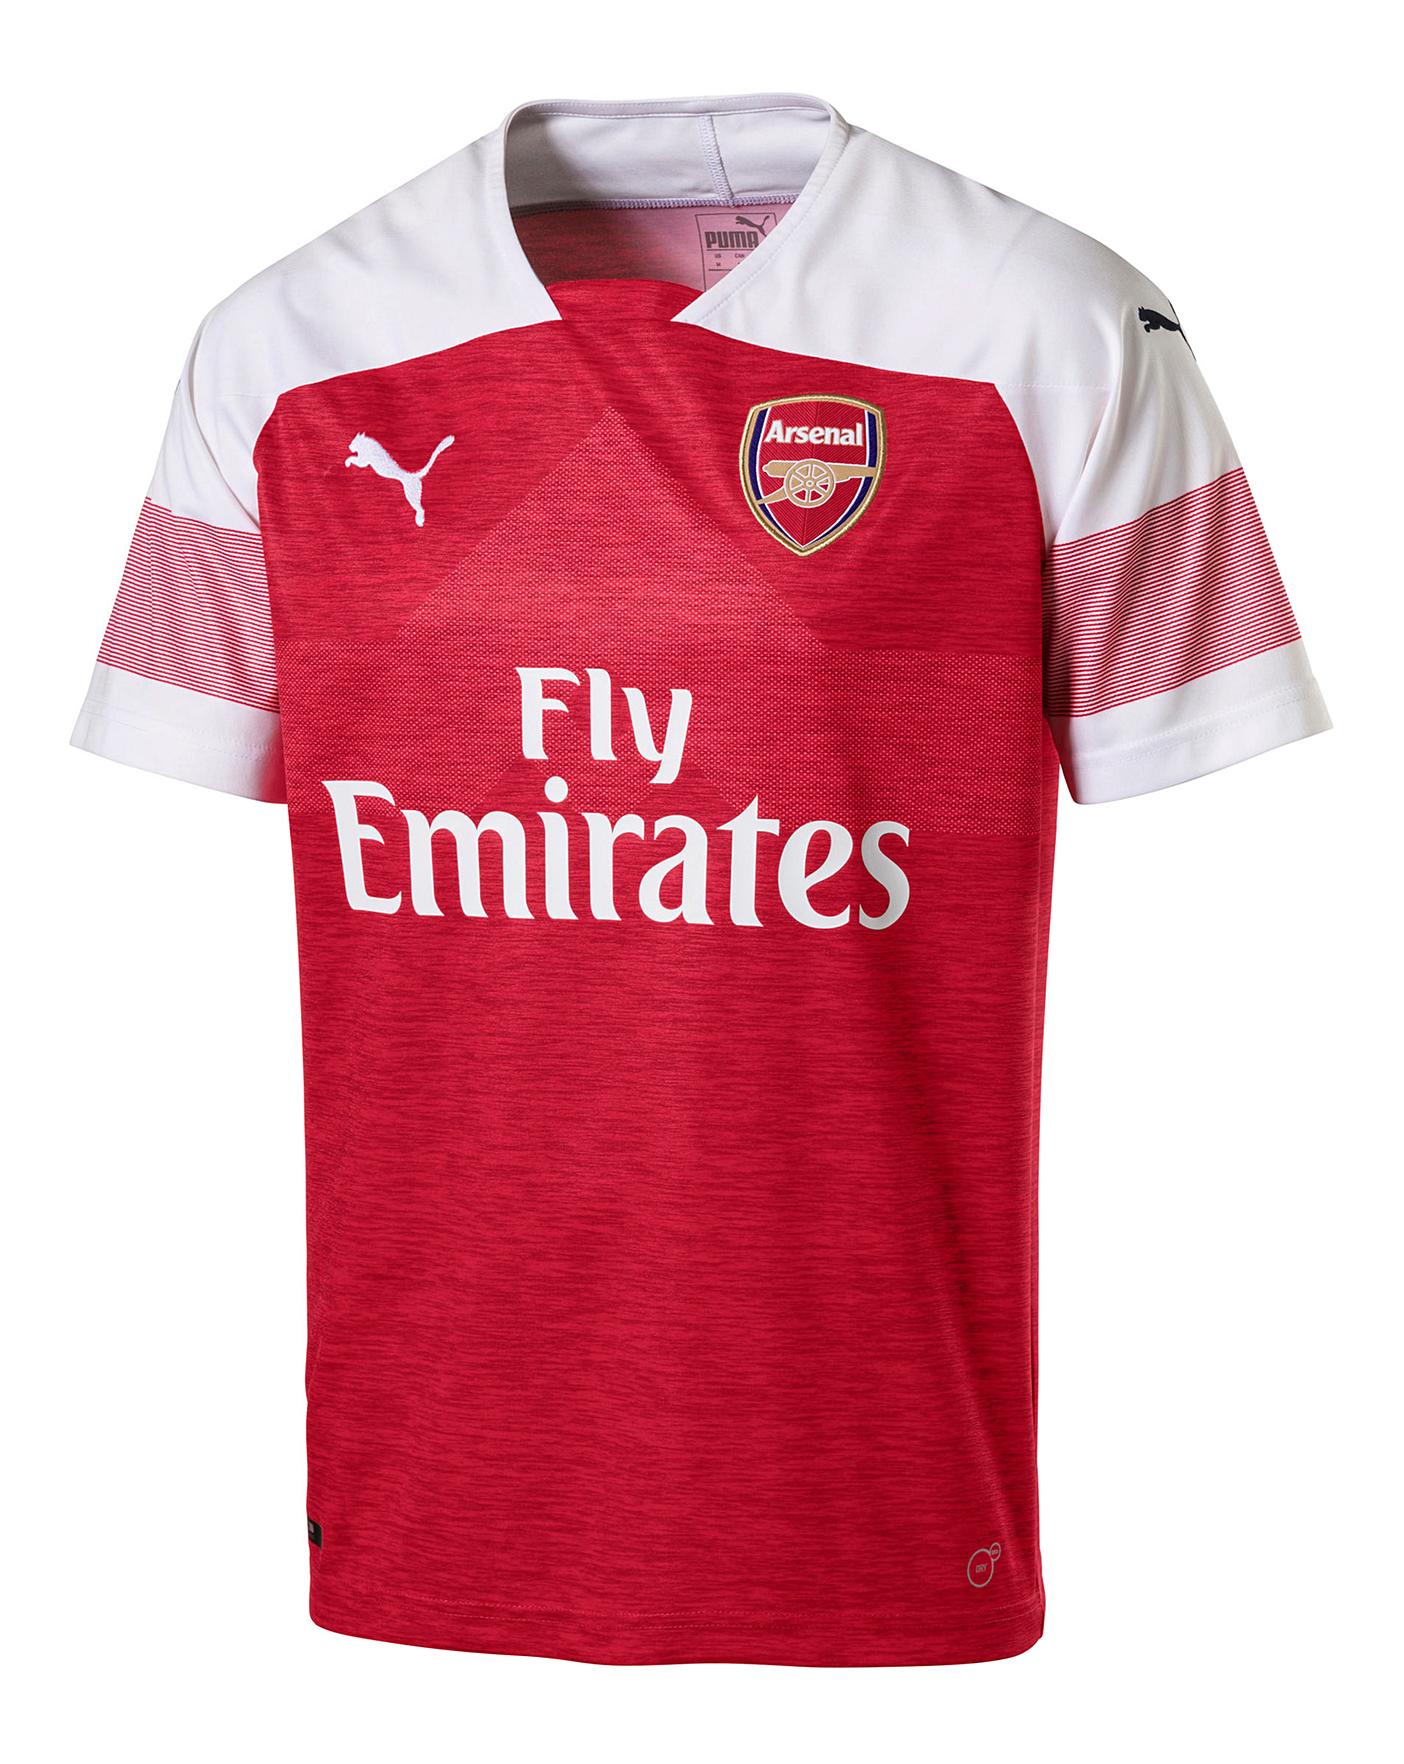 the new arsenal jersey